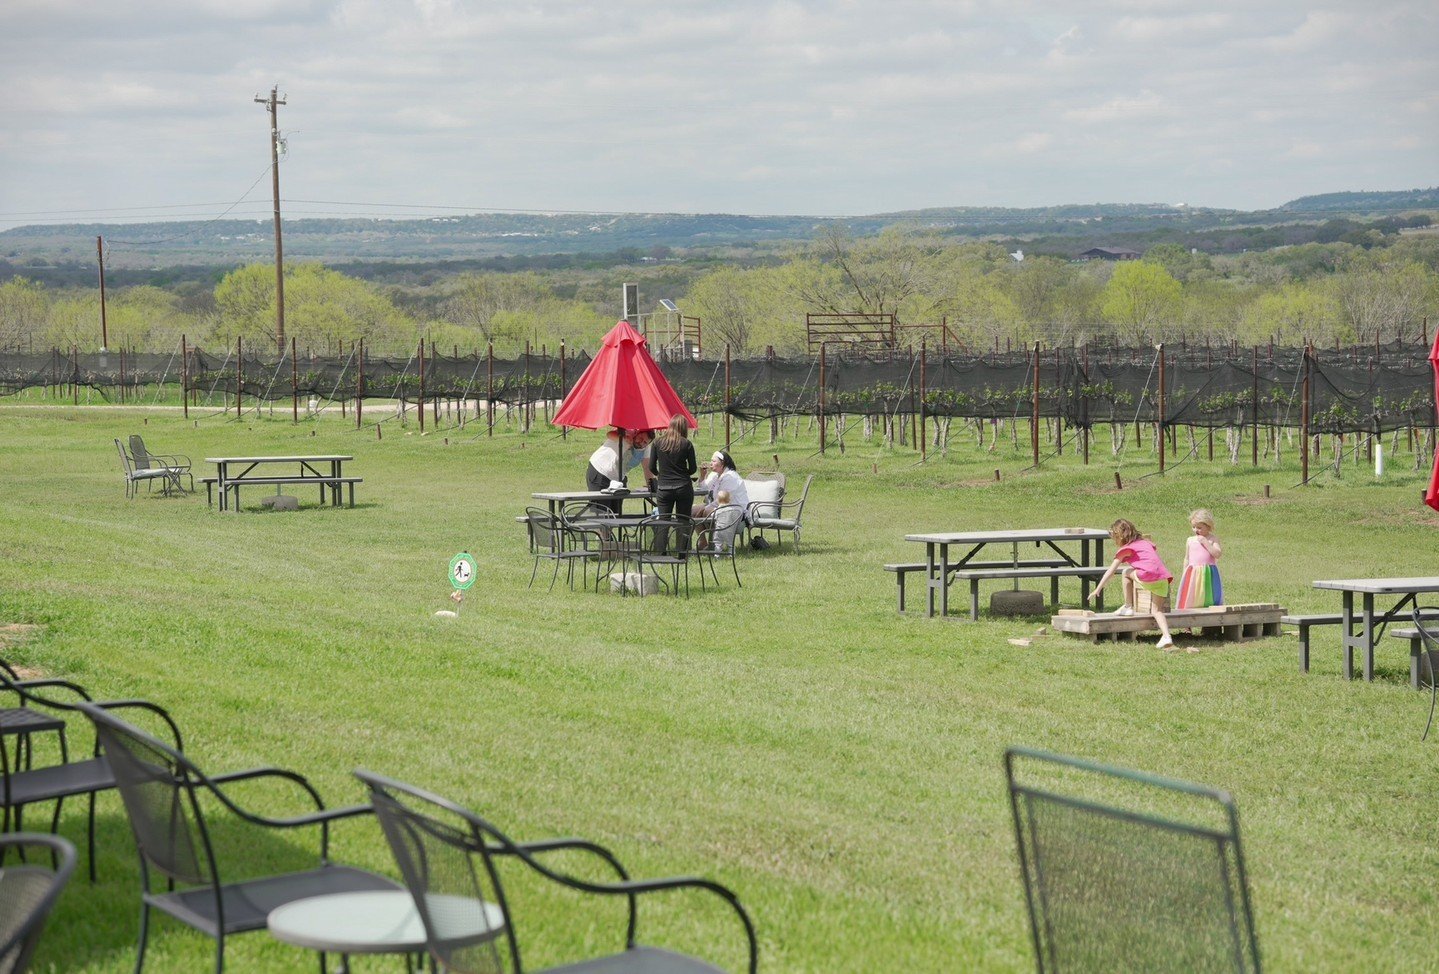 It's a beautiful day in the hill country! Come see us and enjoy this perfect weather. 🍷